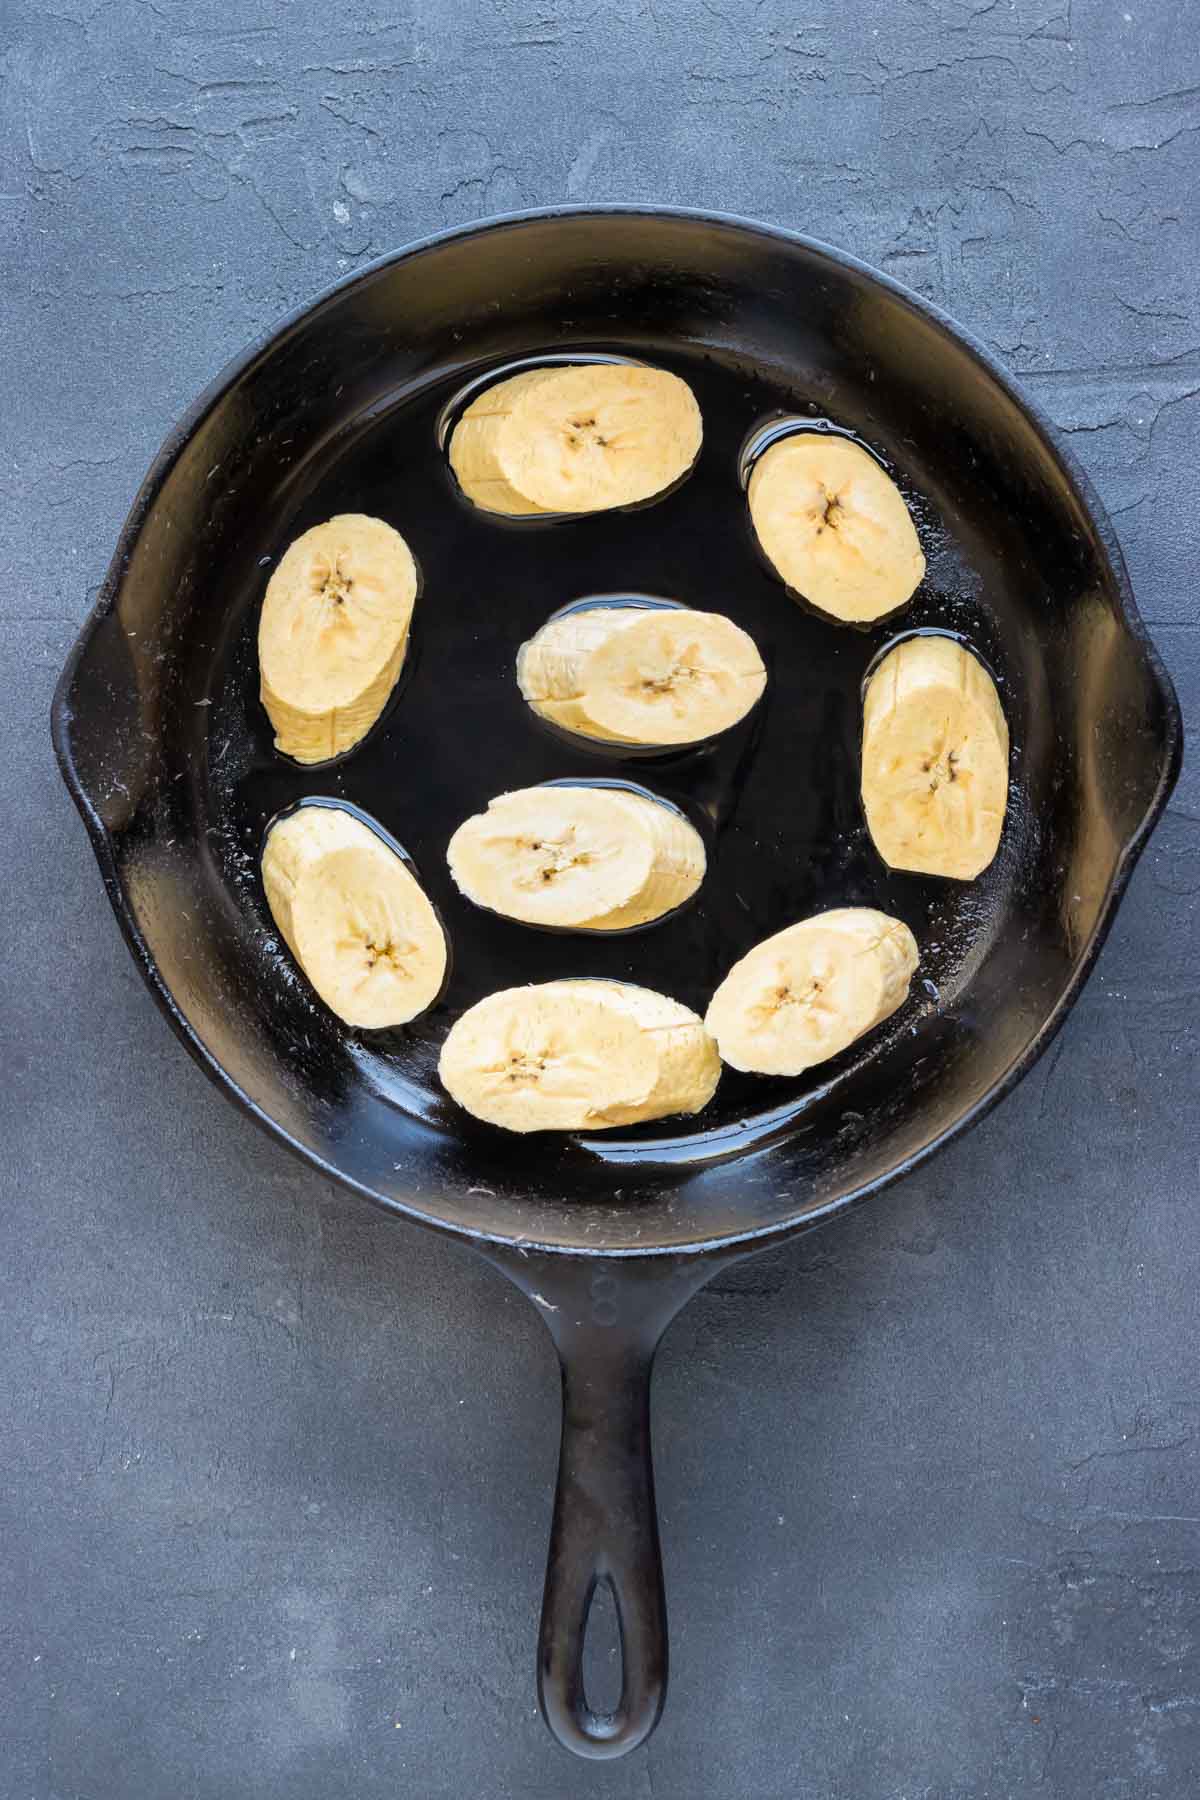 Sliced plantains are added to the melted oil.